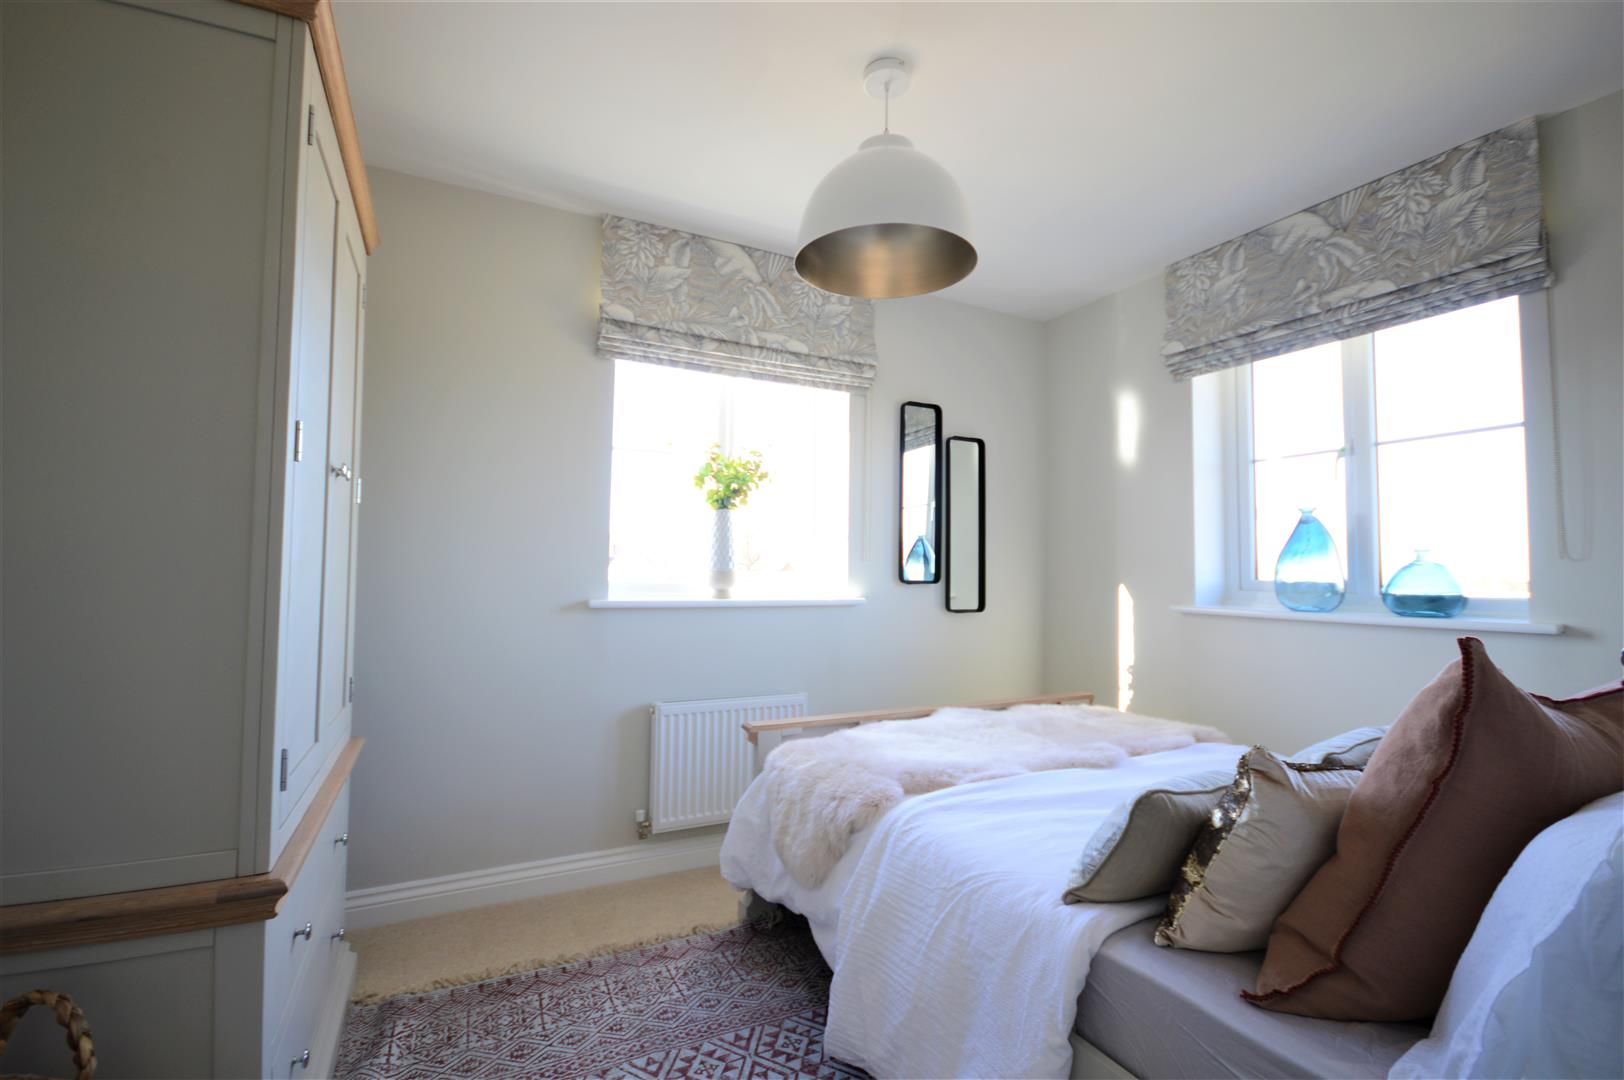 3 bed detached for sale in Kingstone 6